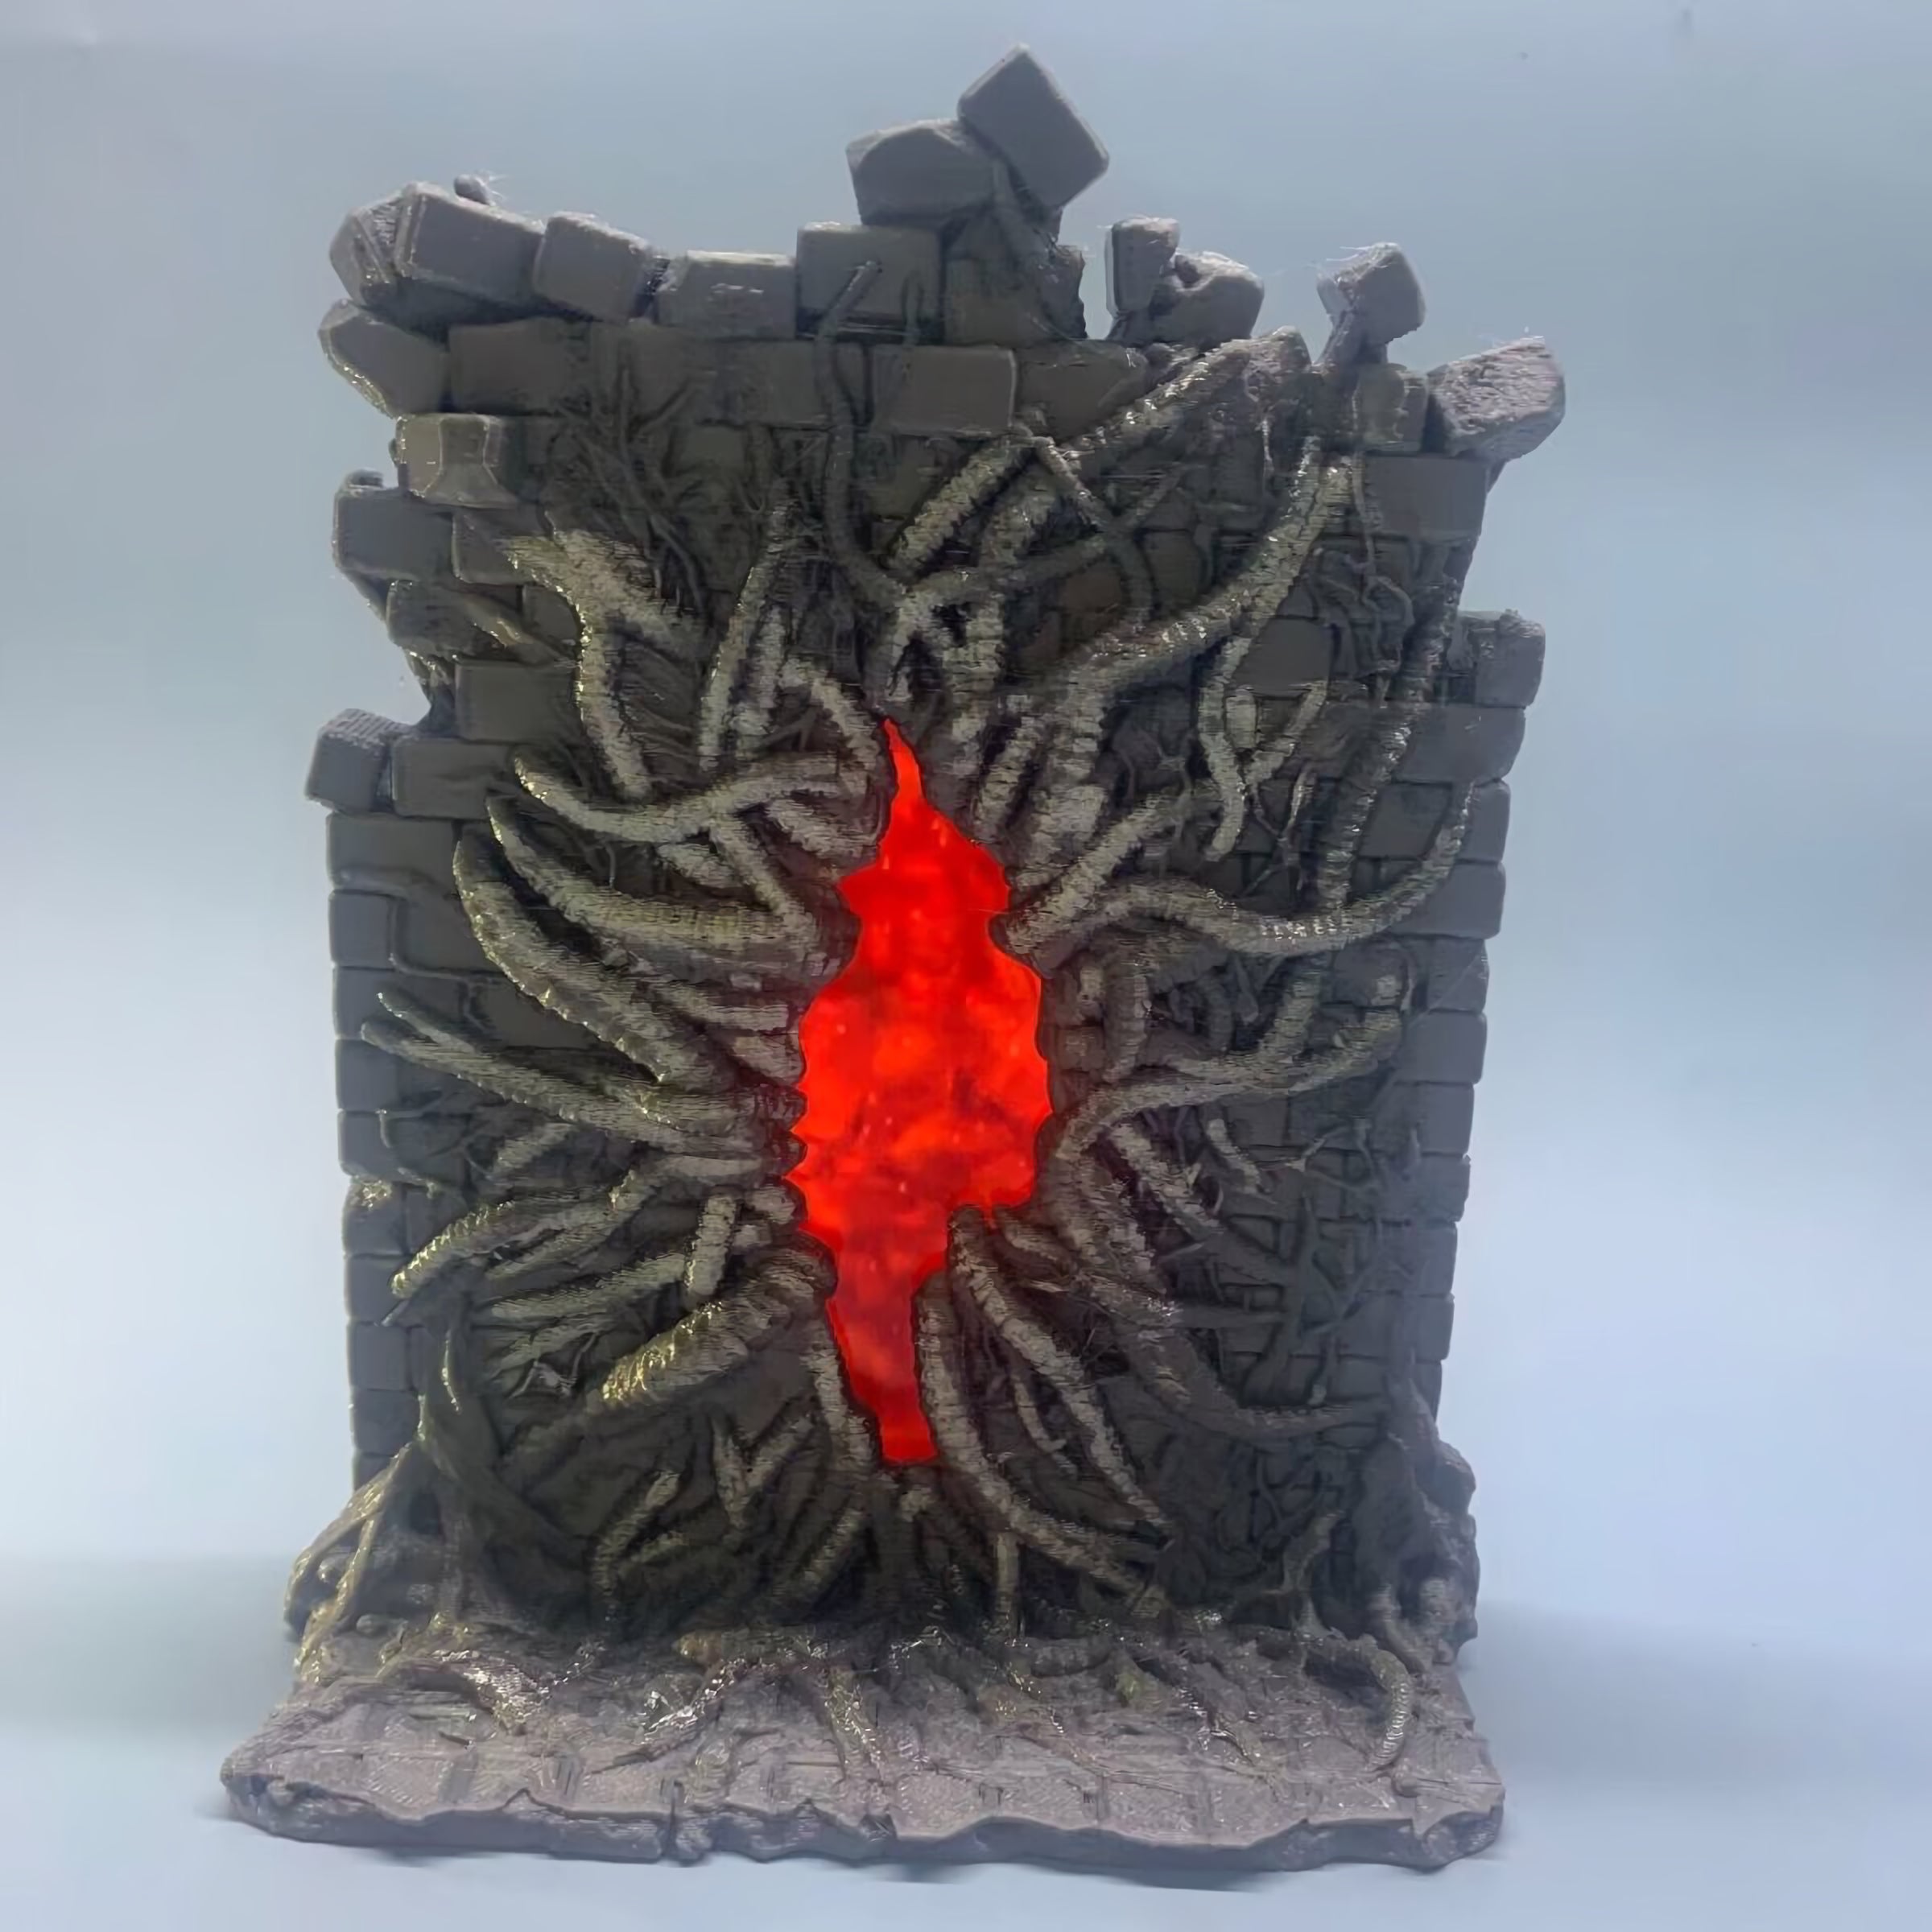 Dungeon & Dragons Portal Phone Stand/D&D/Tabletop Games/Magic/Decorative Figurine - PANSEKtoy